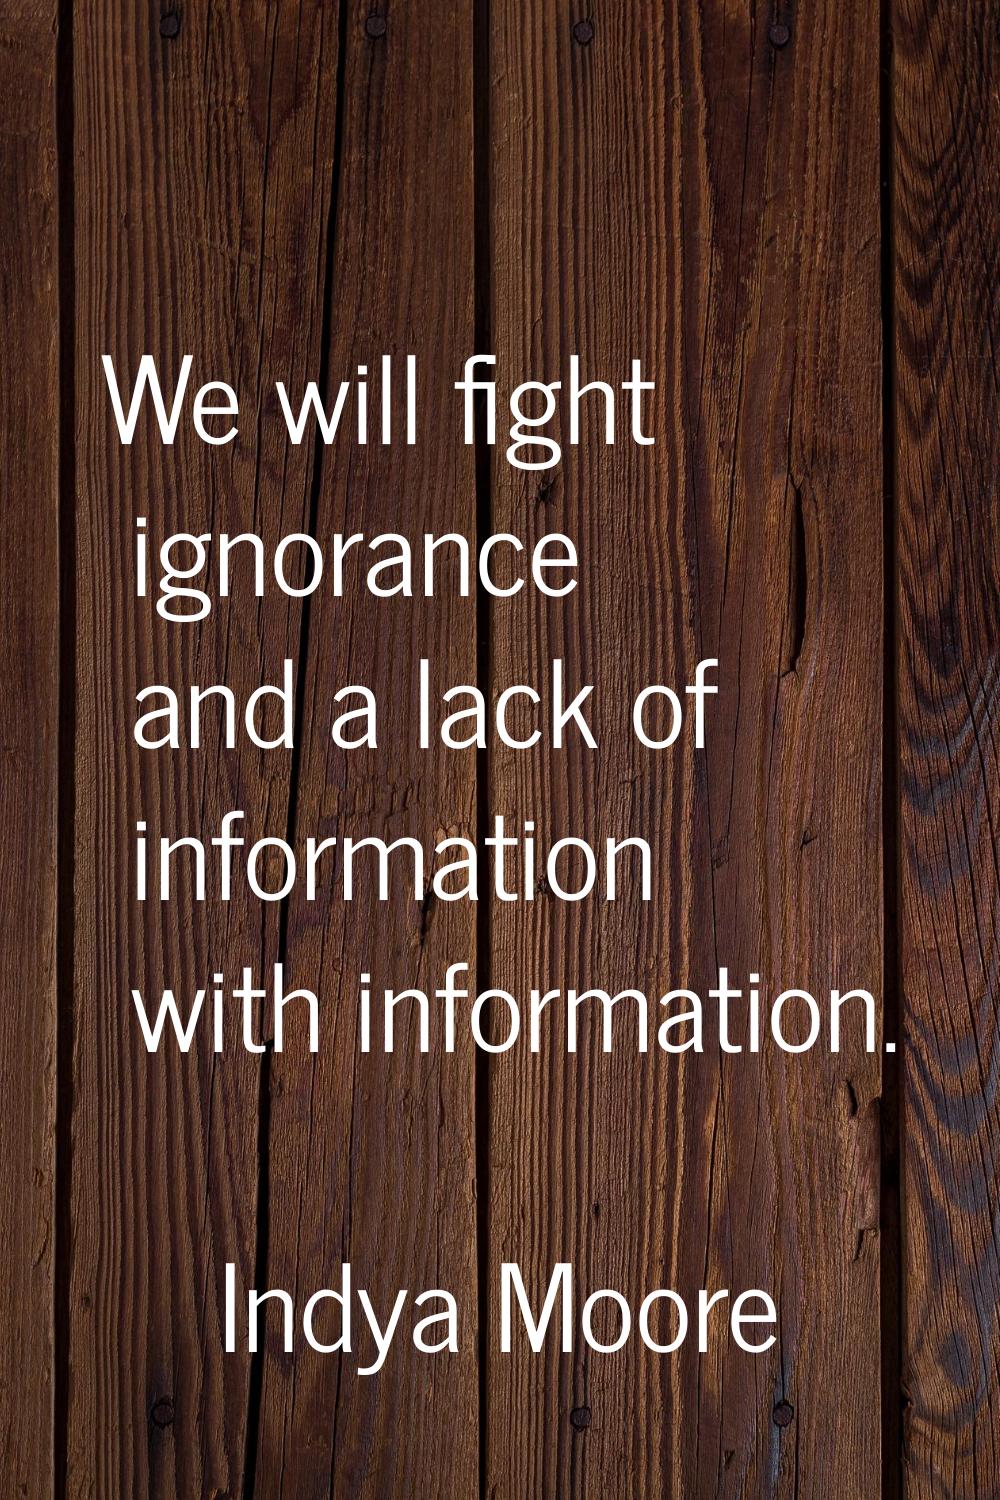 We will fight ignorance and a lack of information with information.